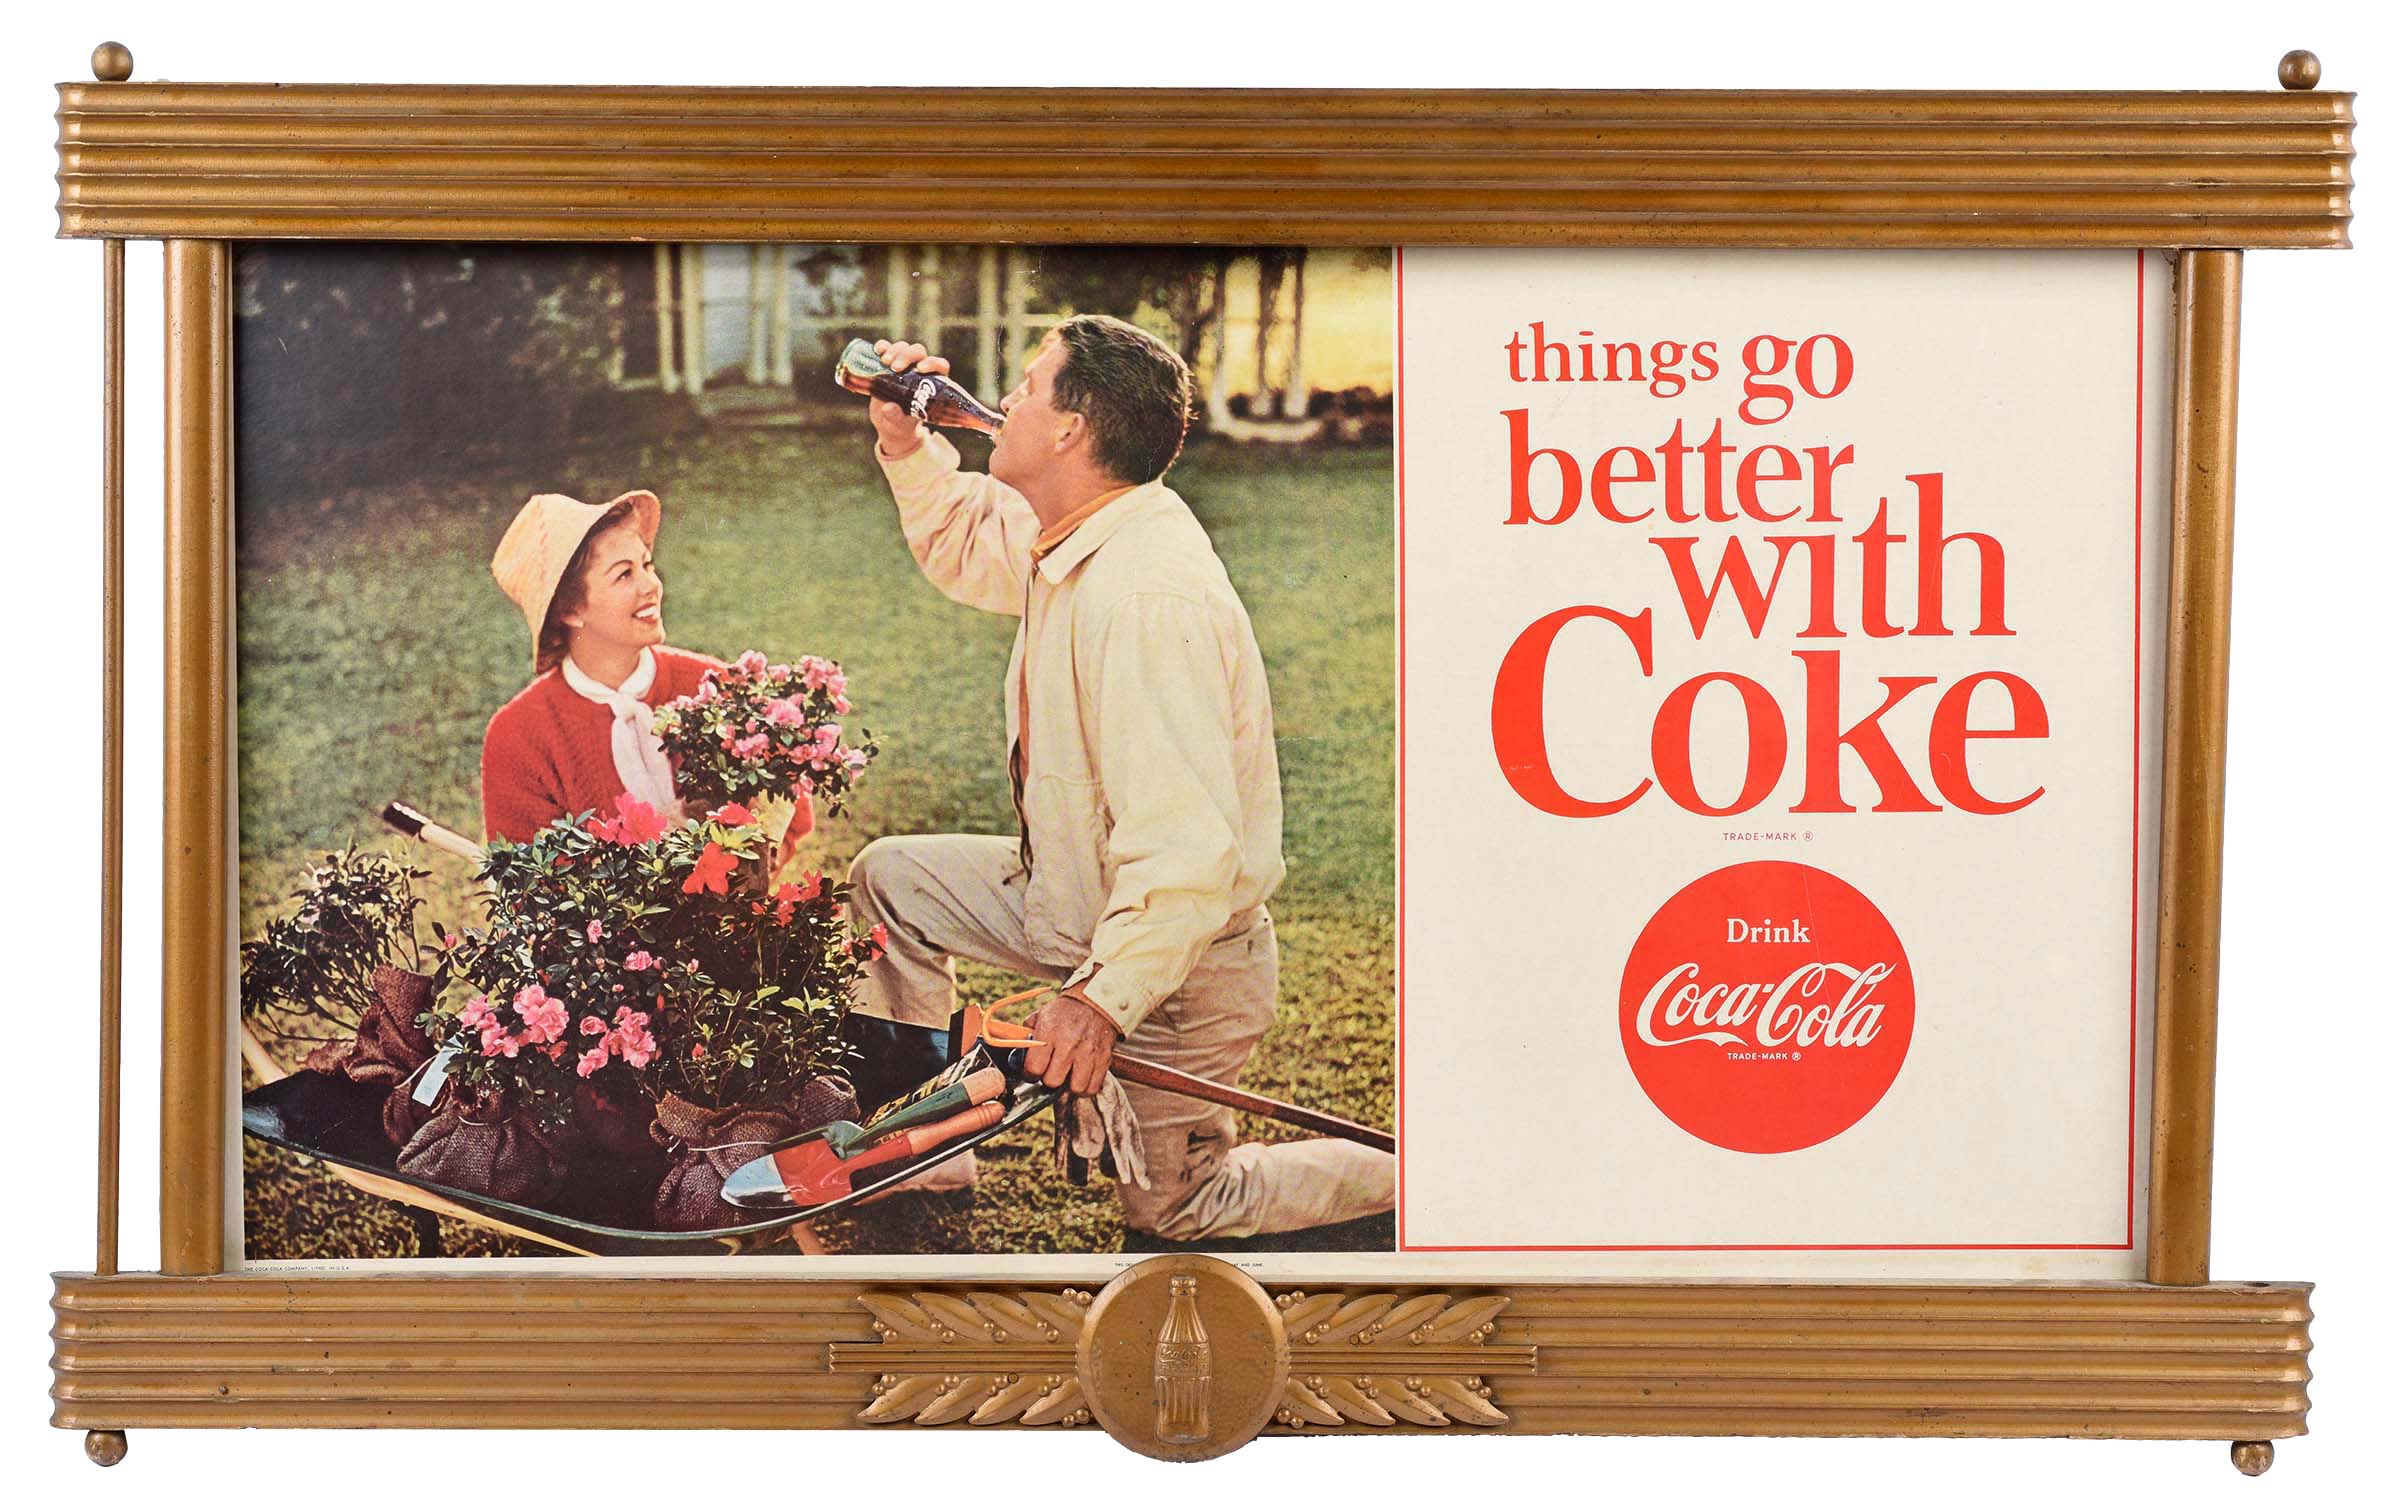 Have a thing going with. Things go better with Coke. Кока-кола things go better. «Things go with Coke” от Slow Pulse Group. Go better.